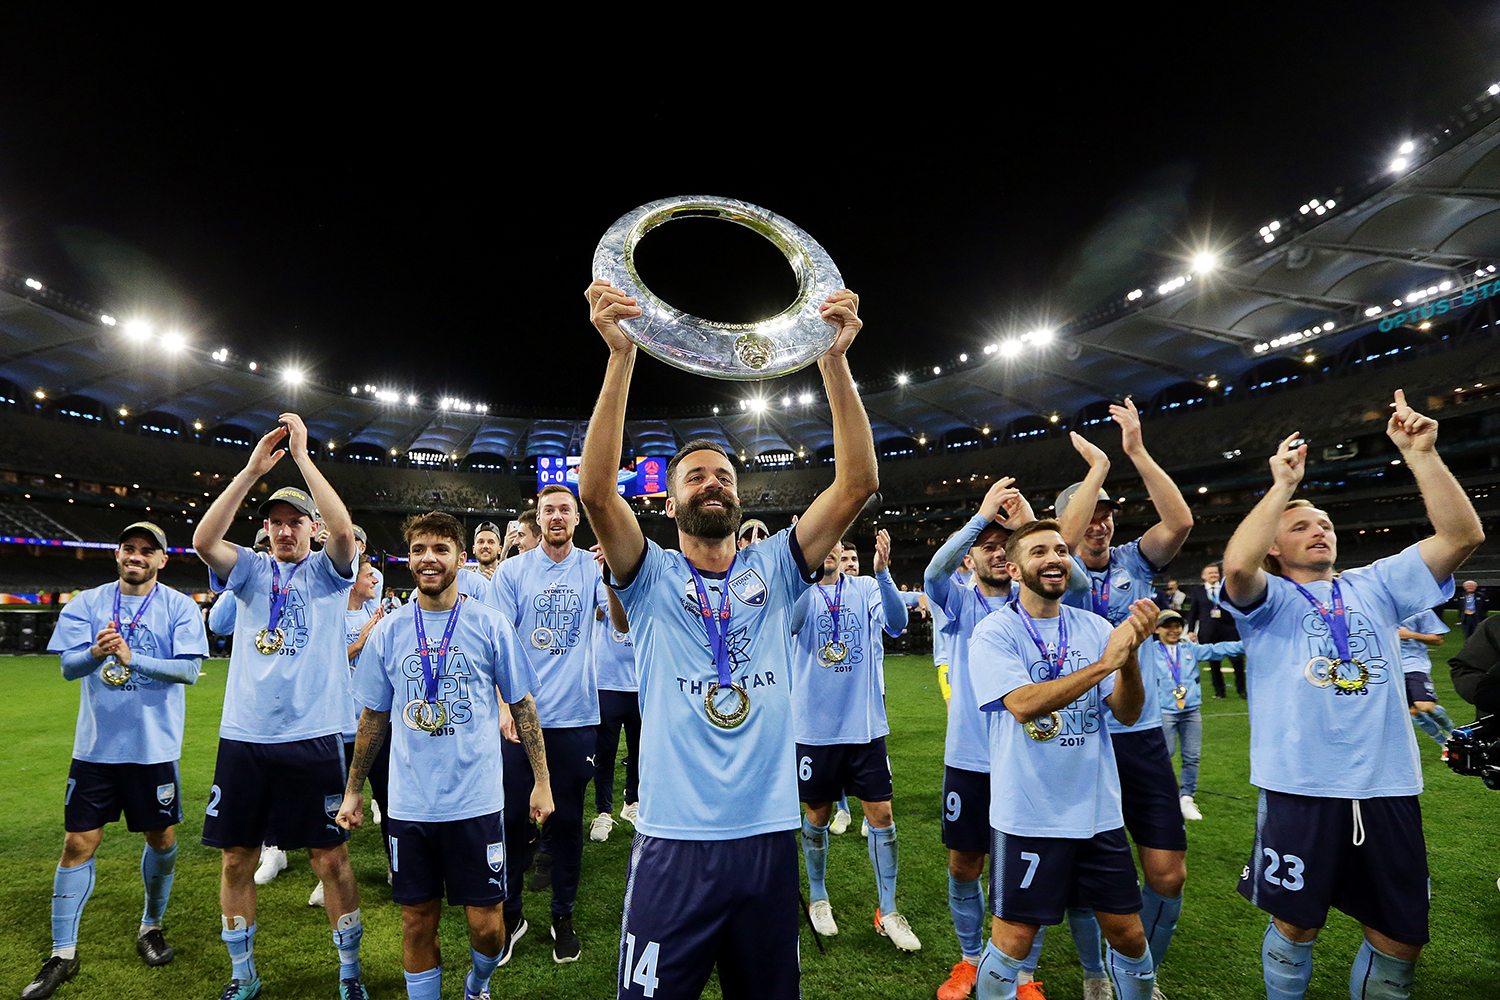 Brosque lifts the trophy